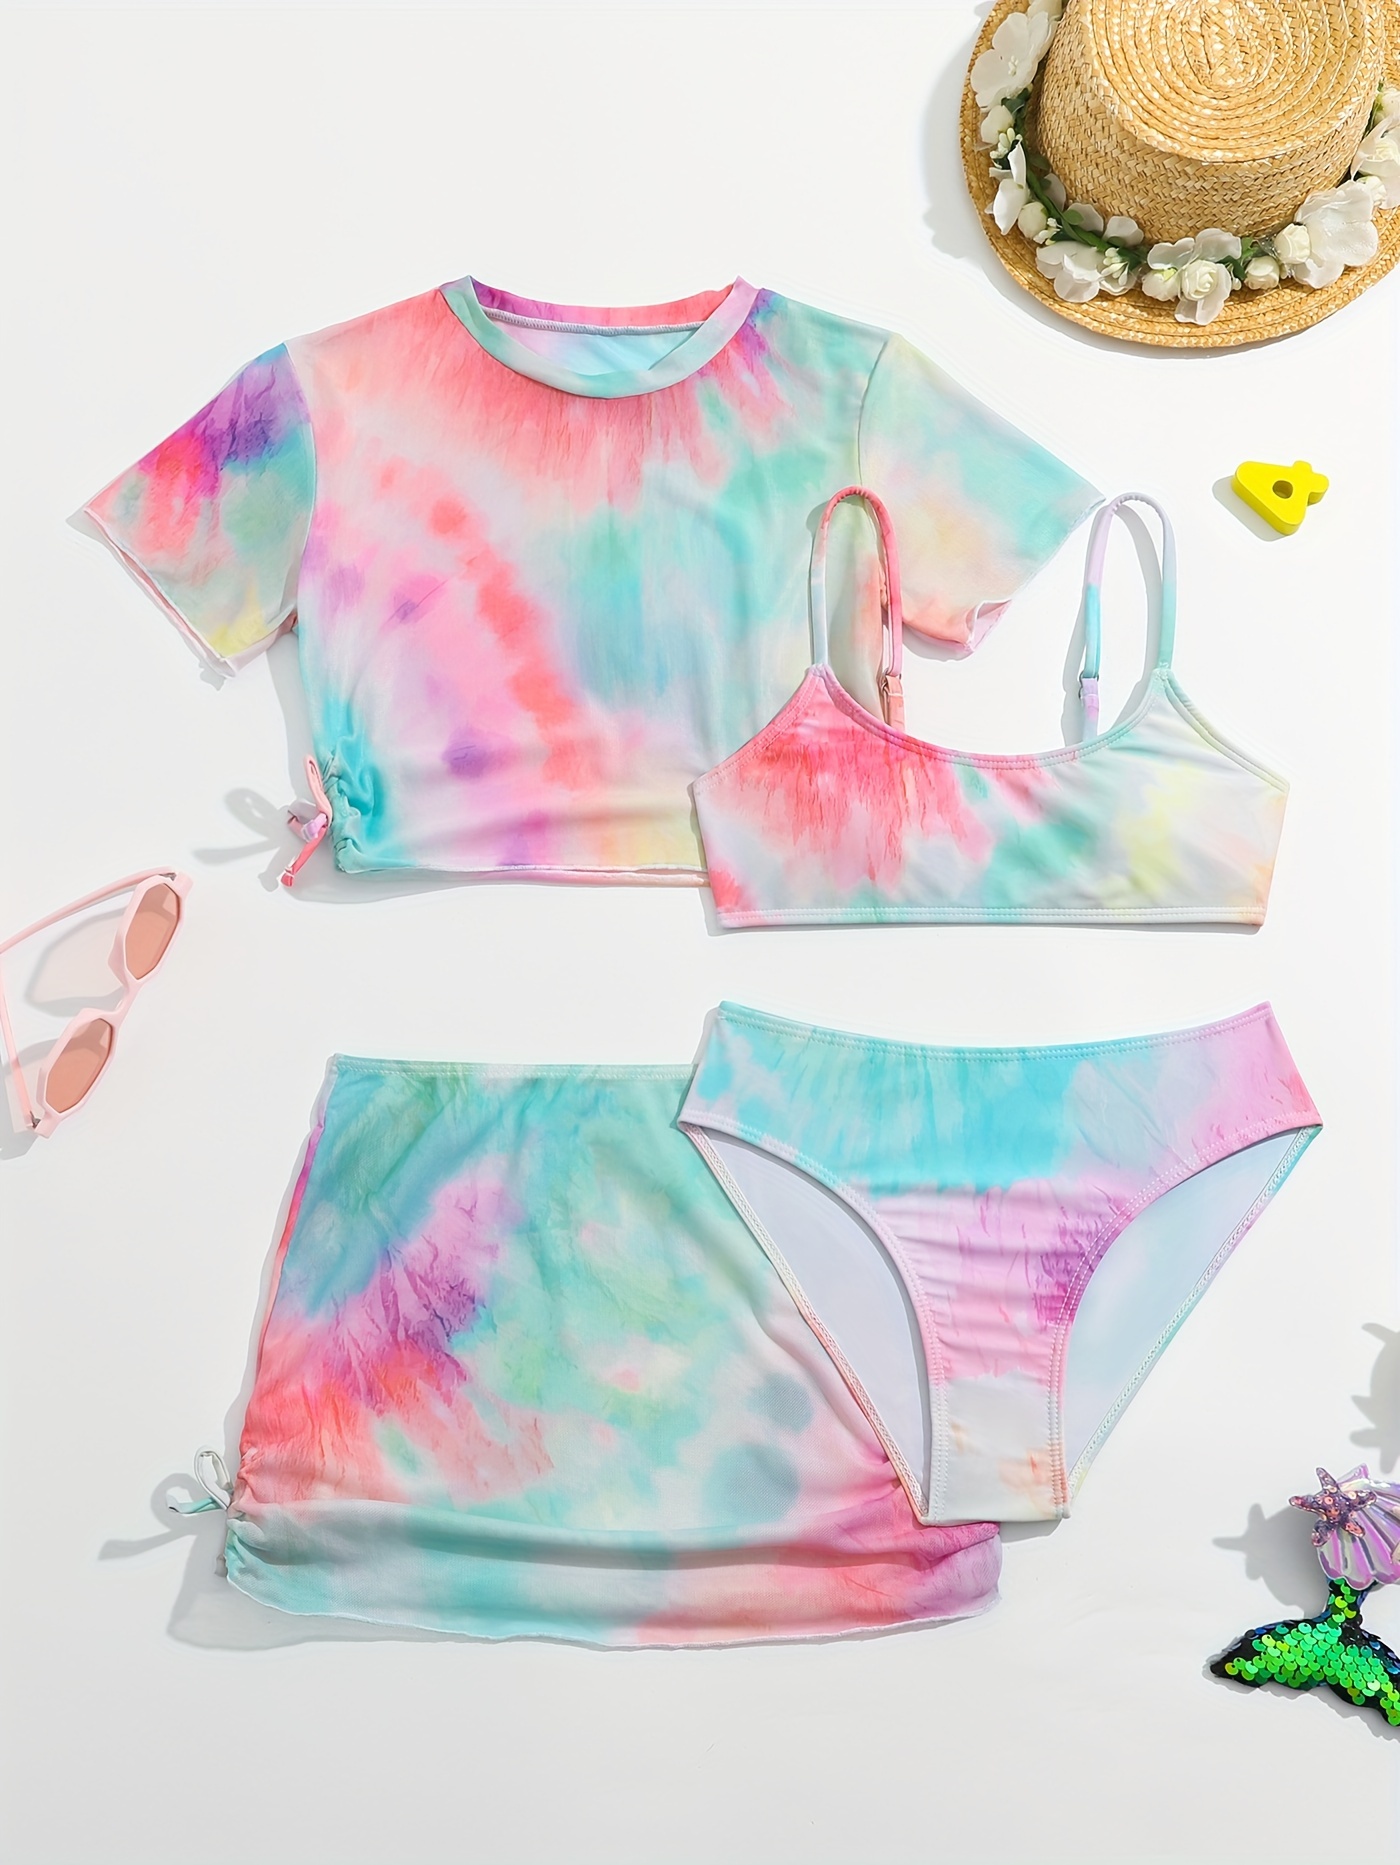 Tie Dyeing Swimwear For Teenage Girls Boutique Swimsuit For Children Aged  10 12 Years Perfect For School And Bathing Suit First Birthday Outfit Item  #210529 From Bai09, $14.26